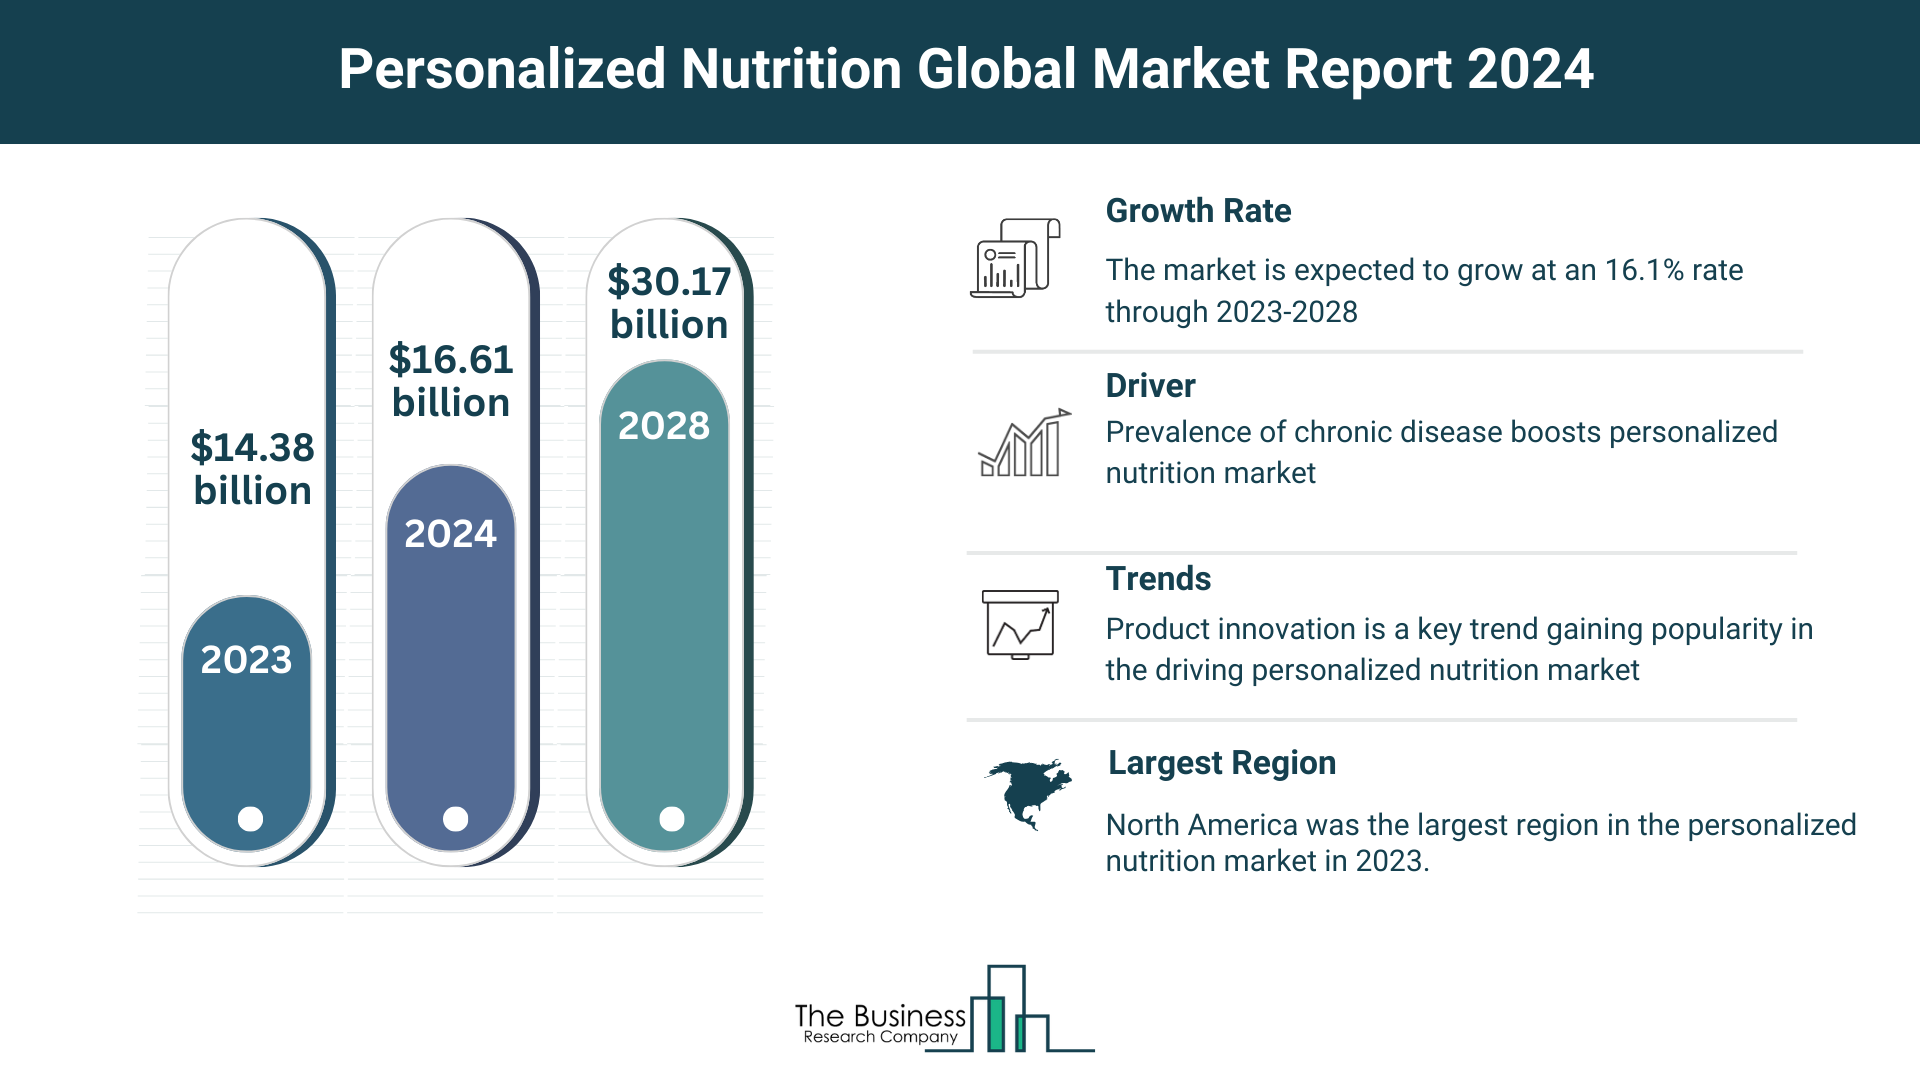 5 Major Insights On The Personalized Nutrition Market 2024